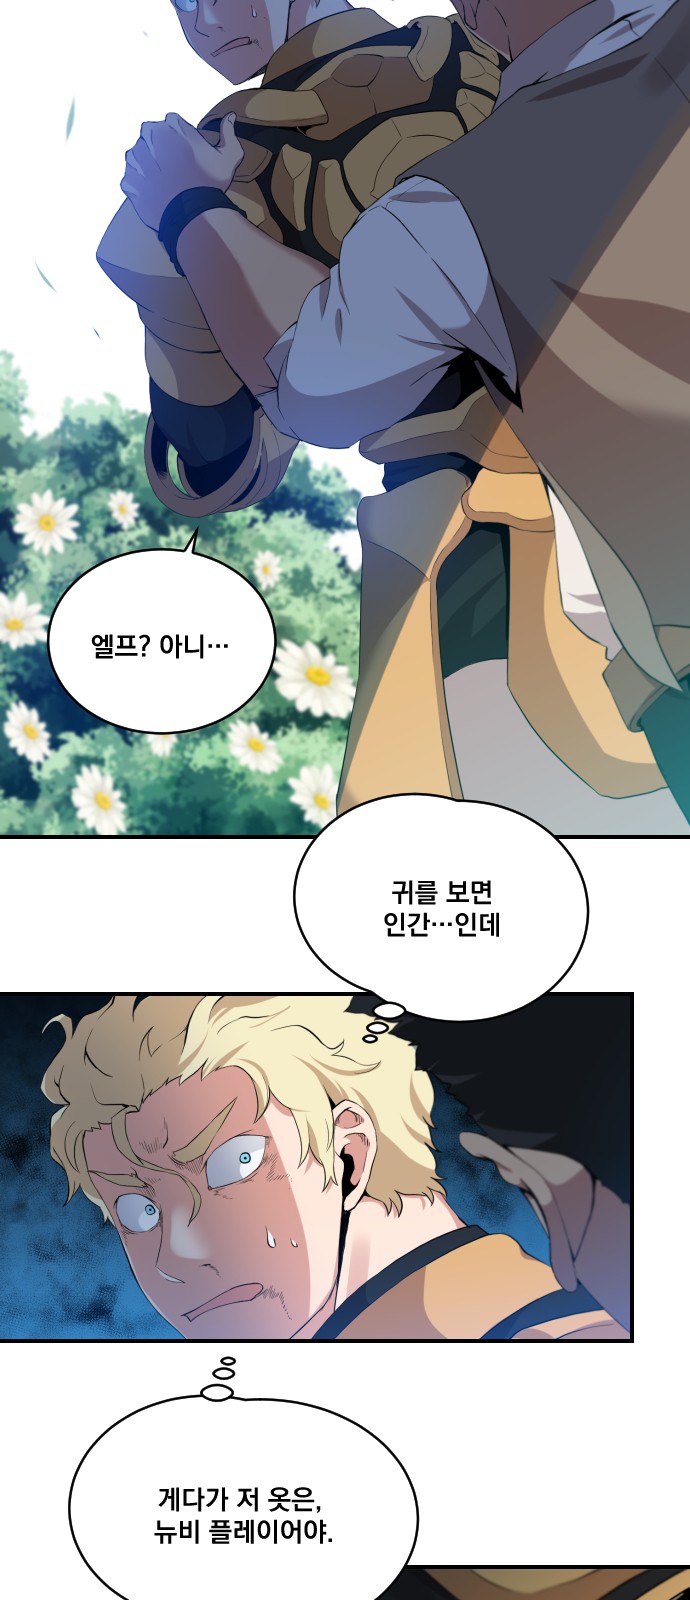 The Strongest Florist - Chapter 9 - Page 2